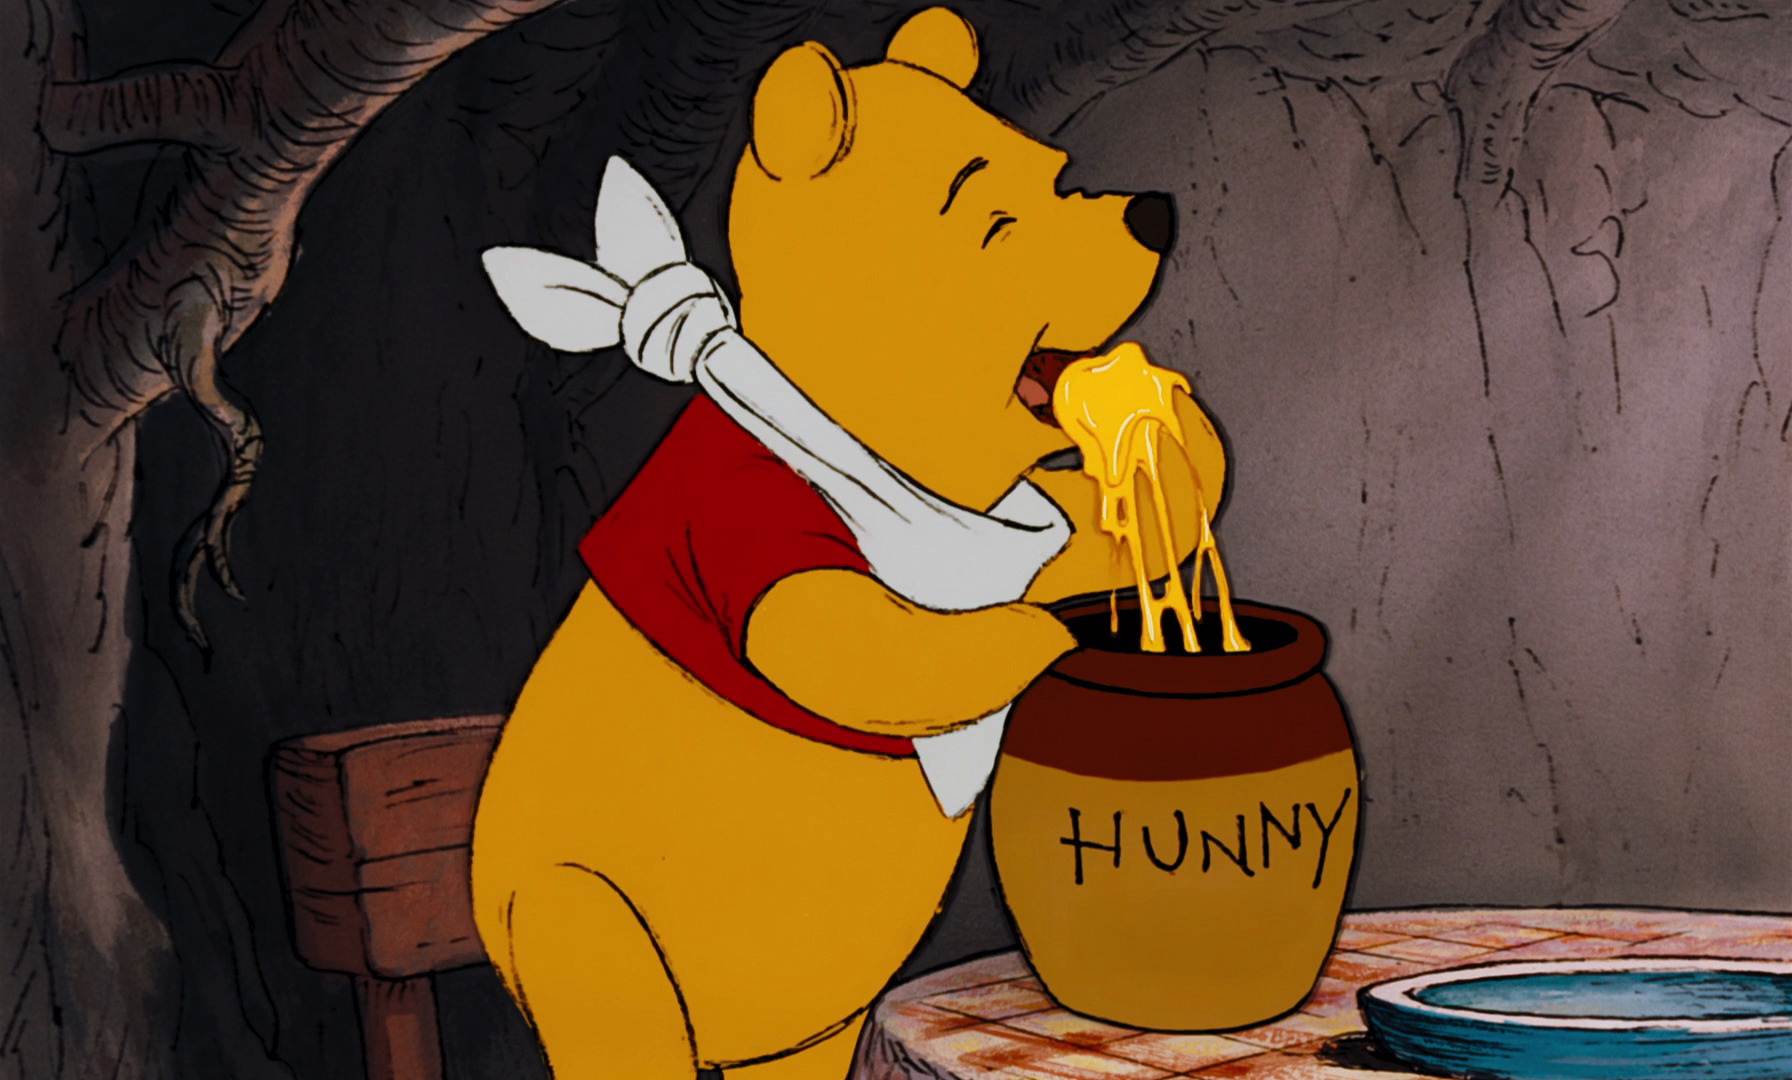 Winnie the Pooh is about to eat honey